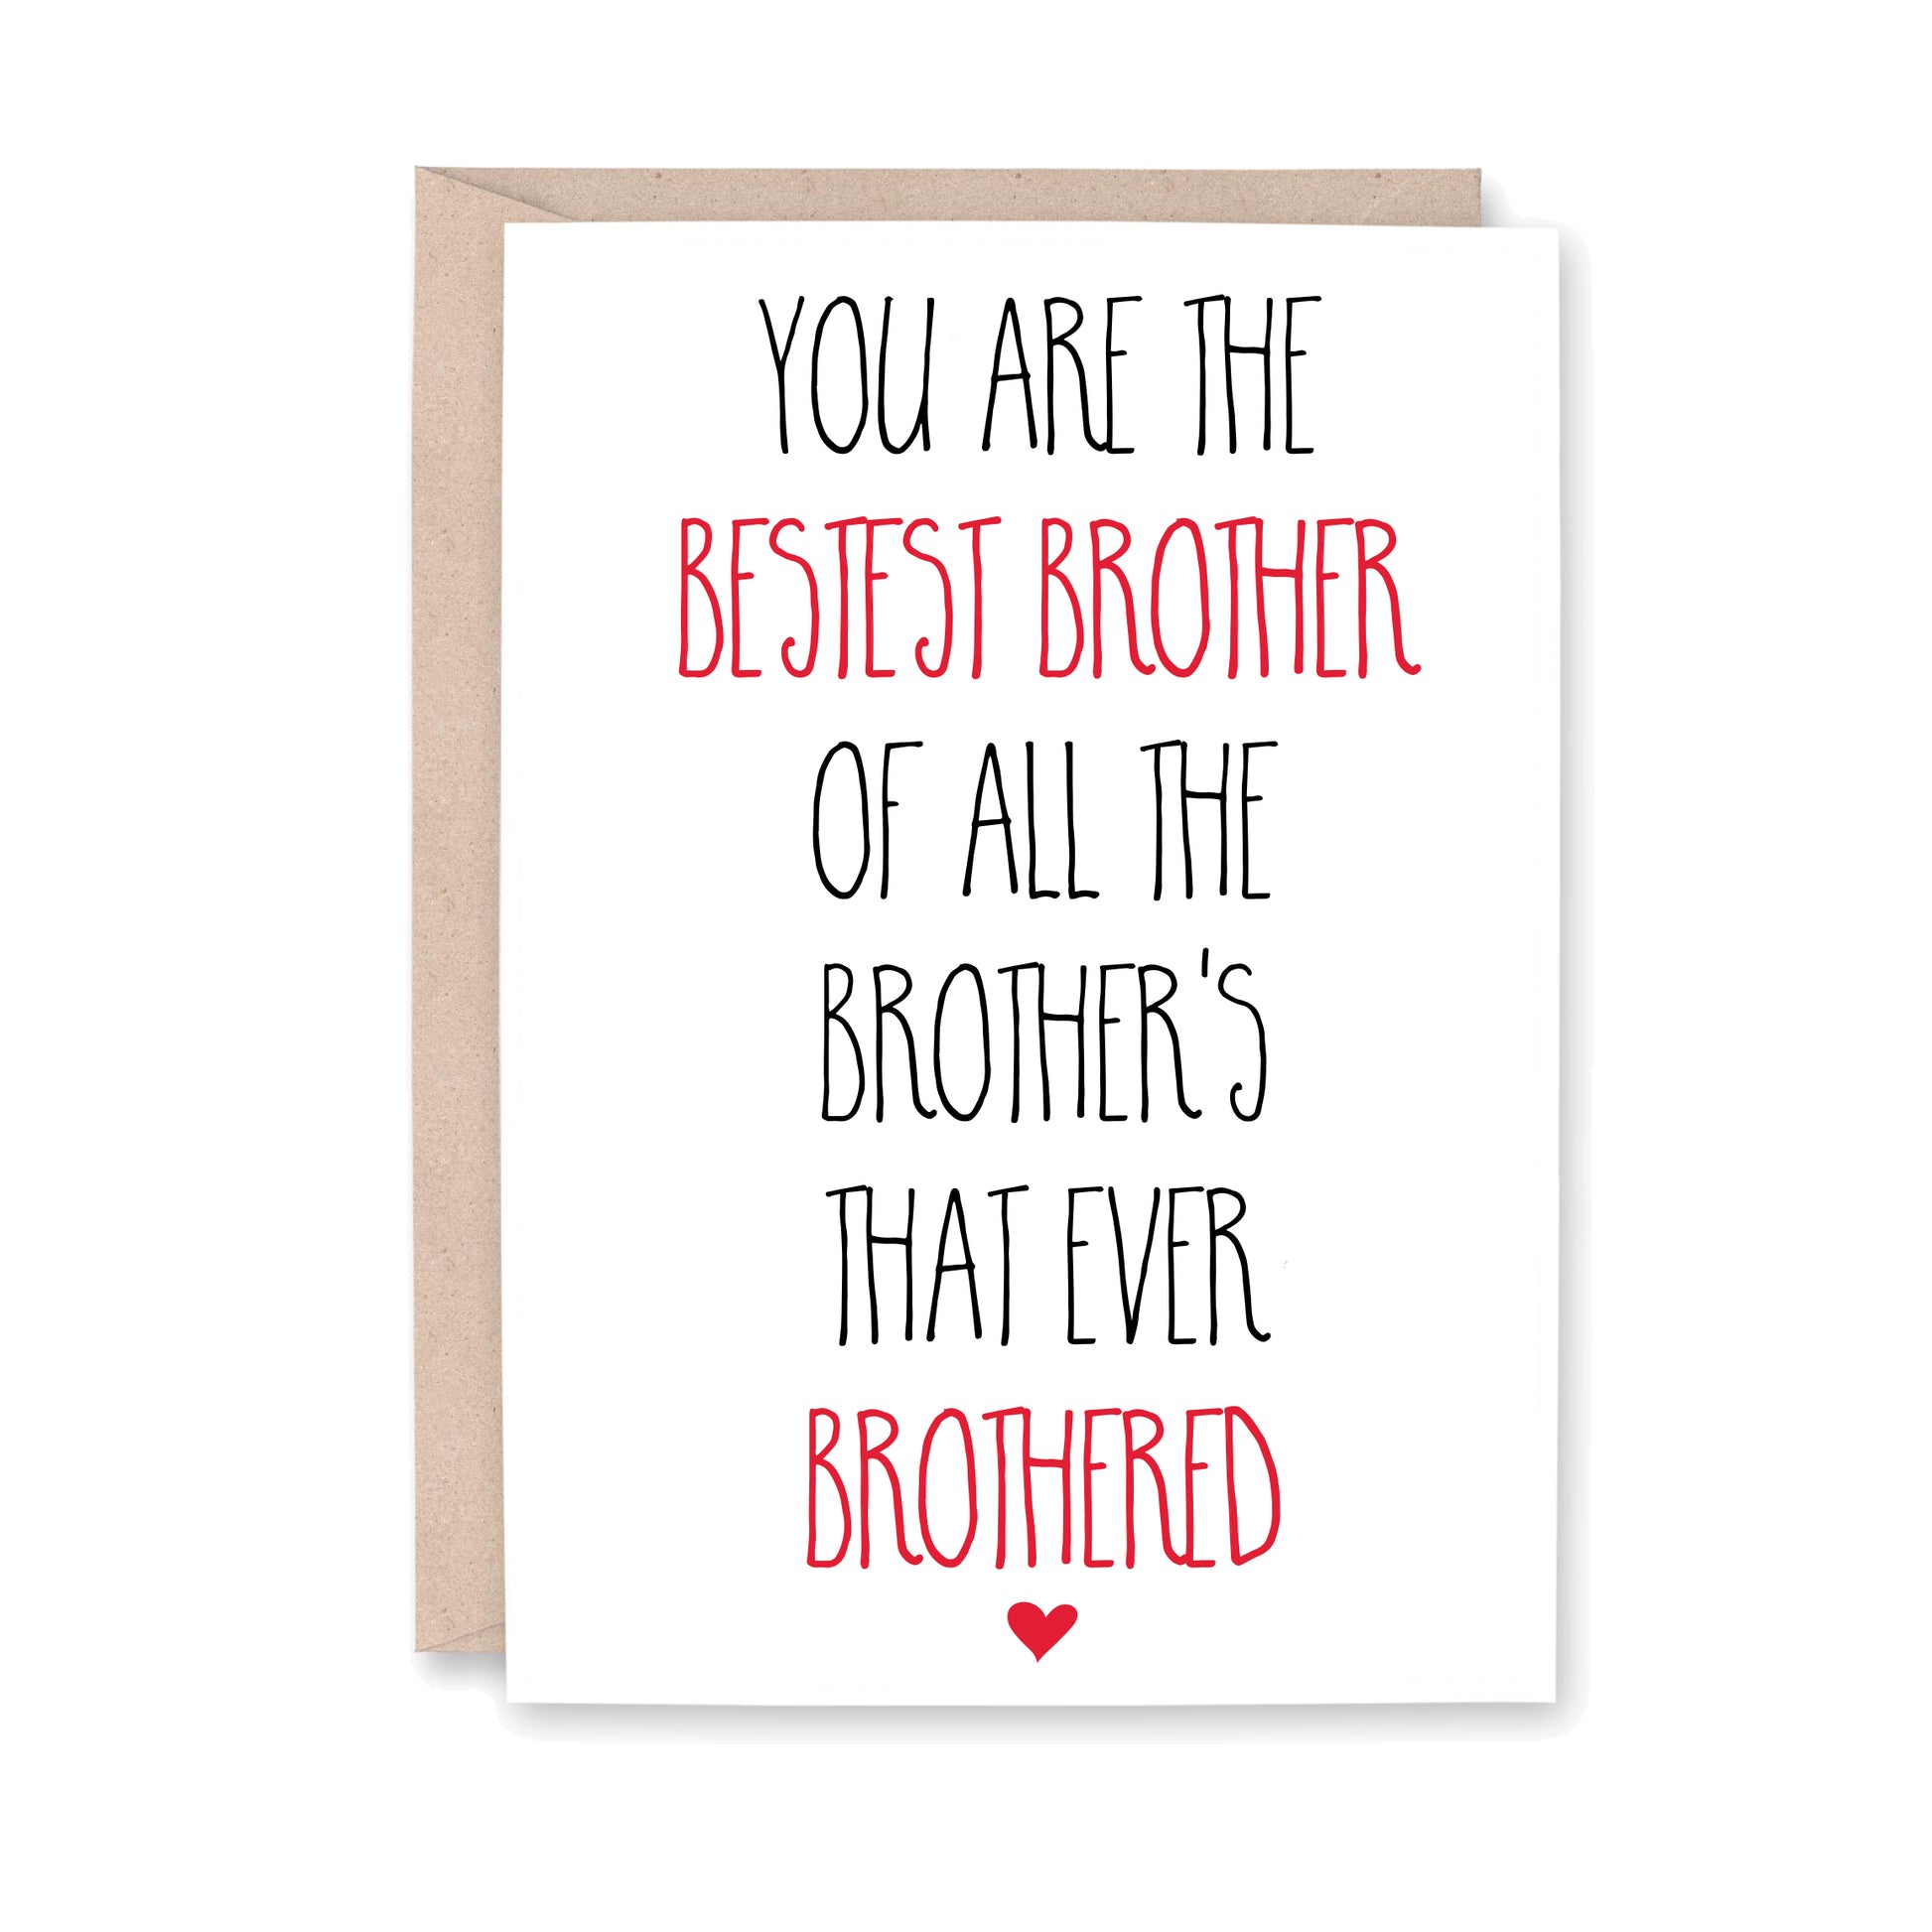 You are the Bestest Brother of all the Brother's that Ever Brothered